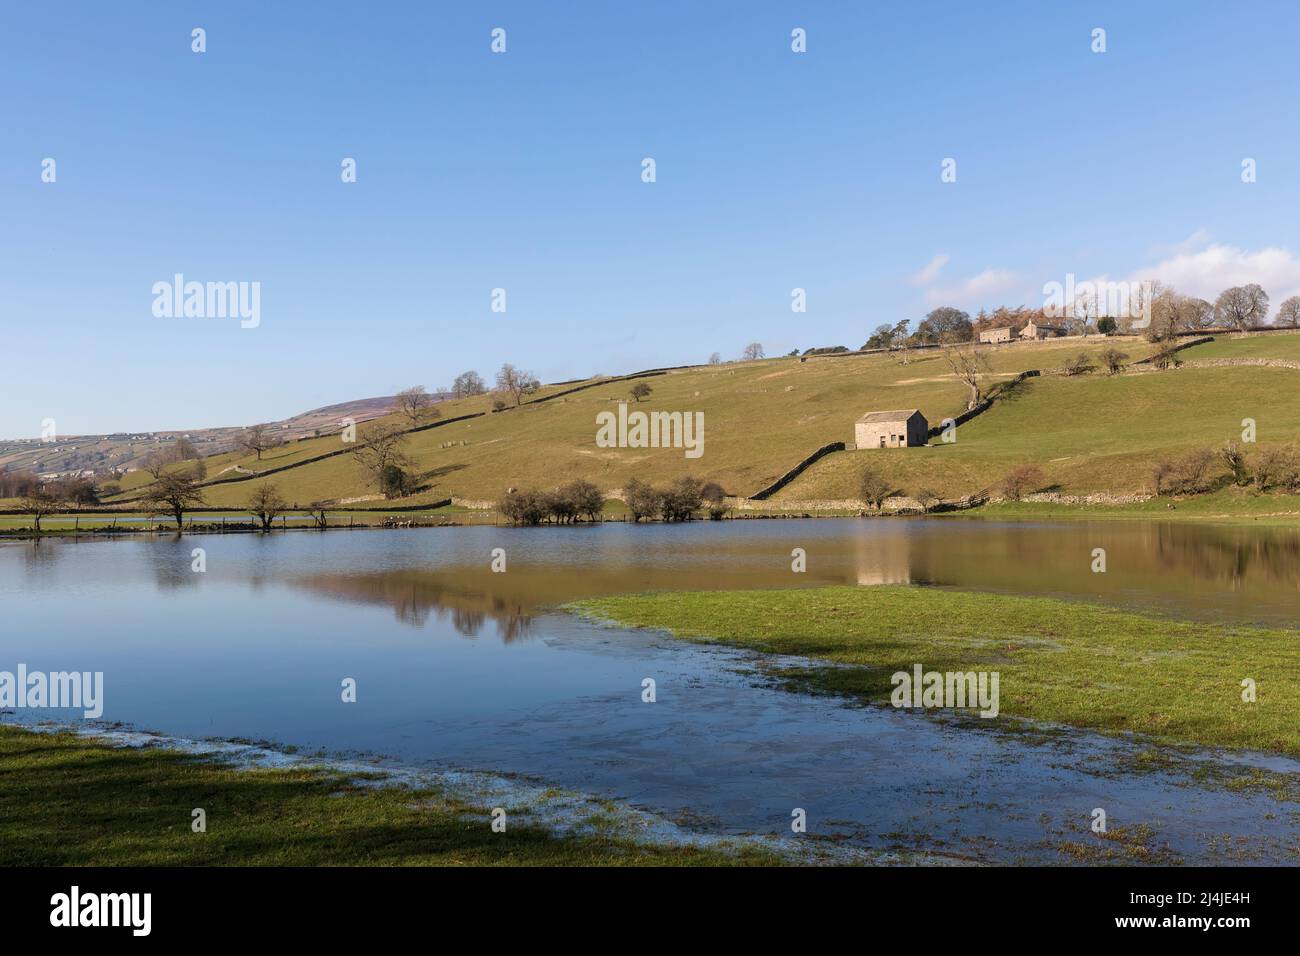 Flooded fields near Reeth in Swaledale, Yorkshire Dales National Park. Iconic stone barn and dry stone walls are reflected in the still water. Stock Photo